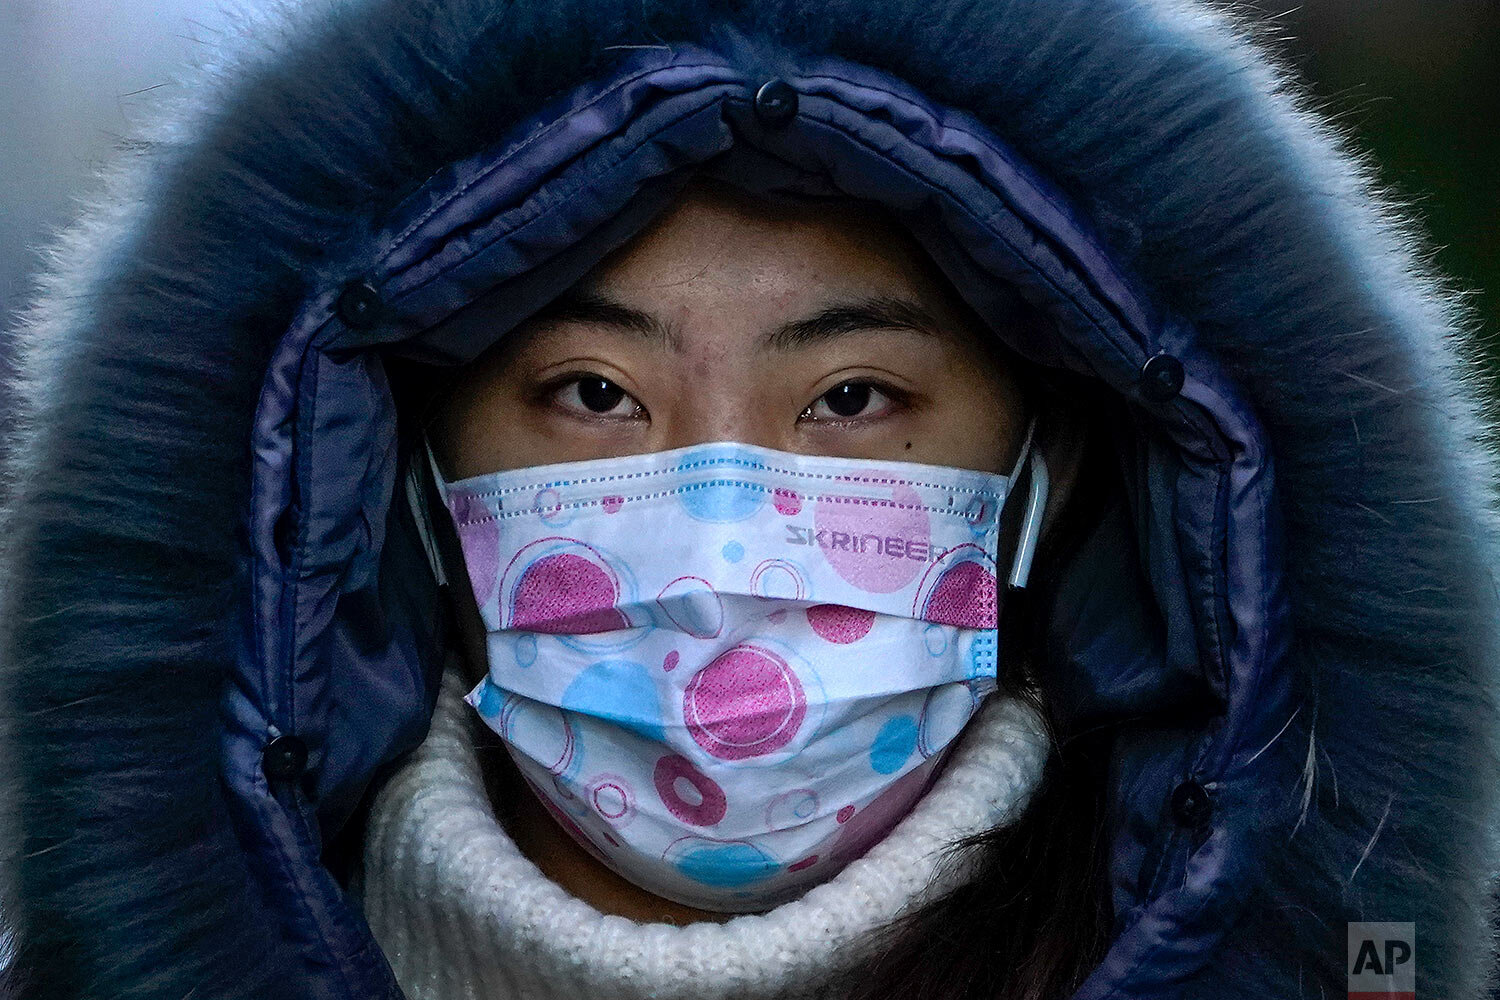  A woman, wearing a face mask to help curb the spread of the coronavirus, walks on a street during the morning rush hour in Beijing, Wednesday, Dec. 16, 2020. (AP Photo/Andy Wong) 